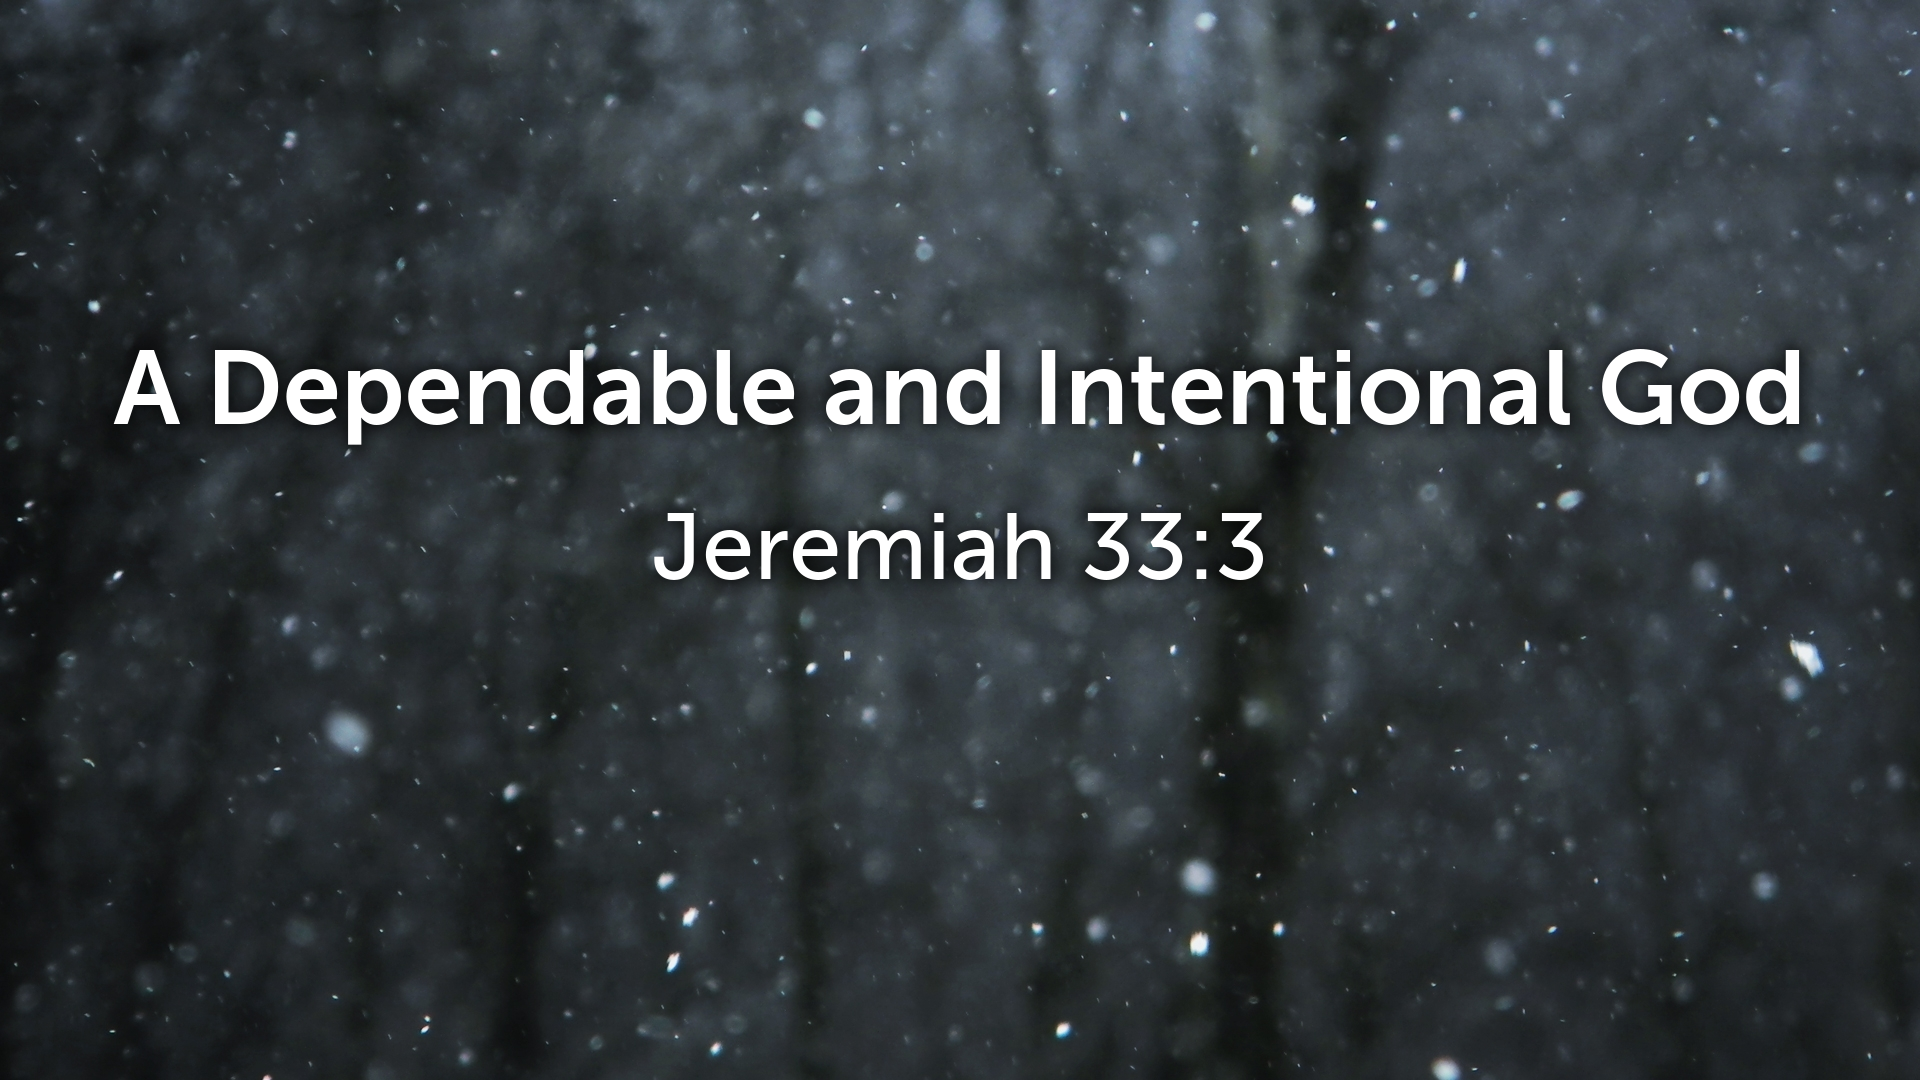 A Dependable and Intentional God